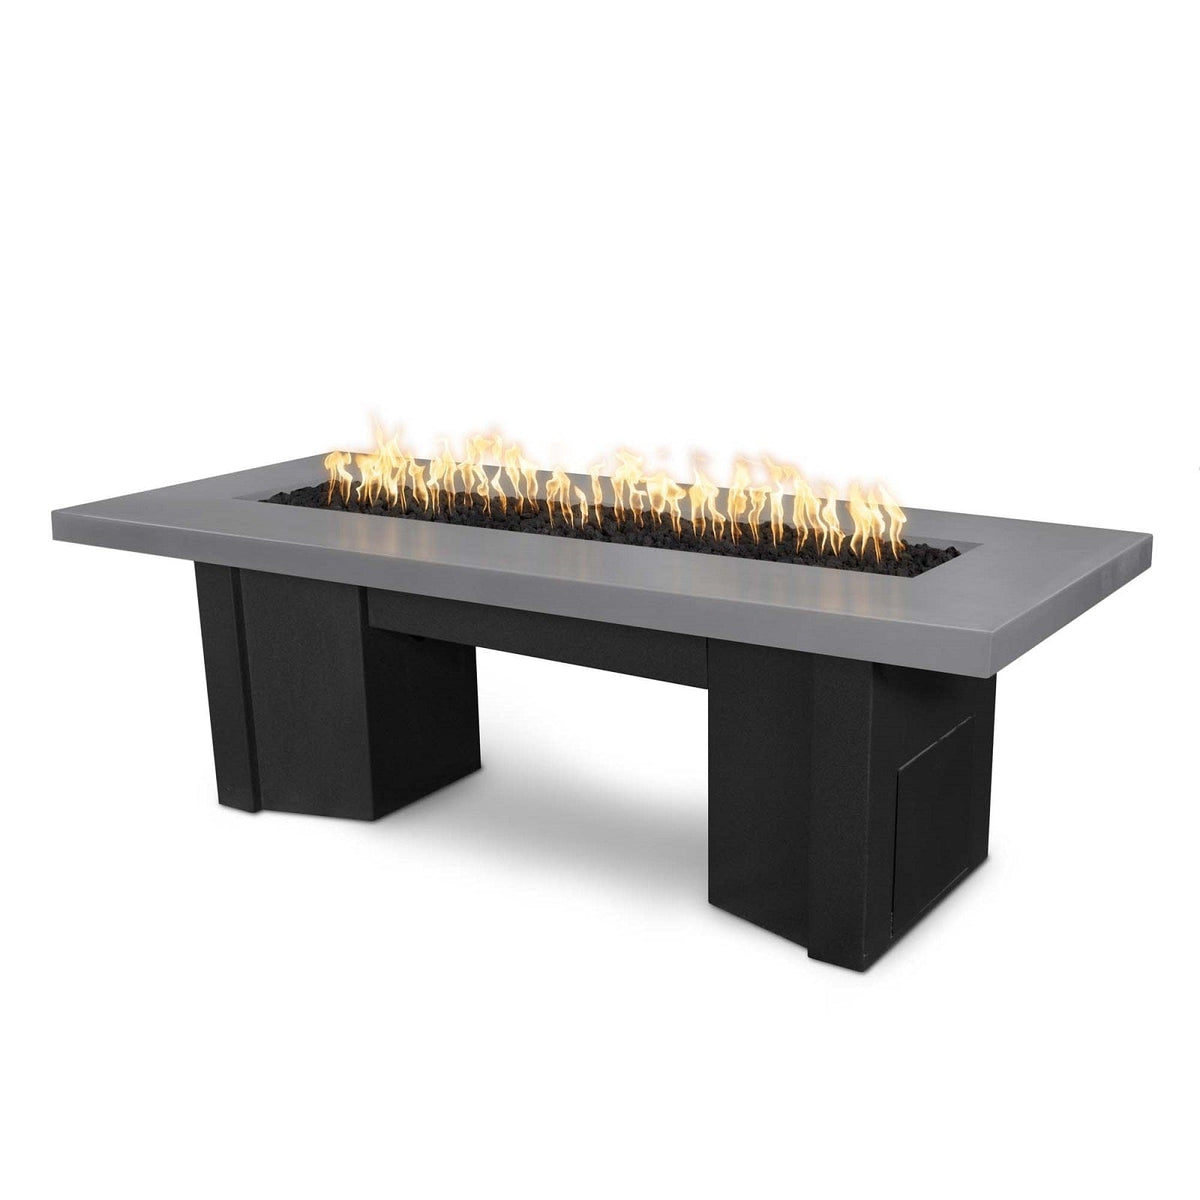 The Outdoor Plus Fire Features Natural Gray (-NGY) / Black Powder Coated Steel (-BLK) The Outdoor Plus 78&quot; Alameda Fire Table Smooth Concrete in Liquid Propane - Flame Sense System with Push Button Spark Igniter / OPT-ALMGFRC78FSEN-LP